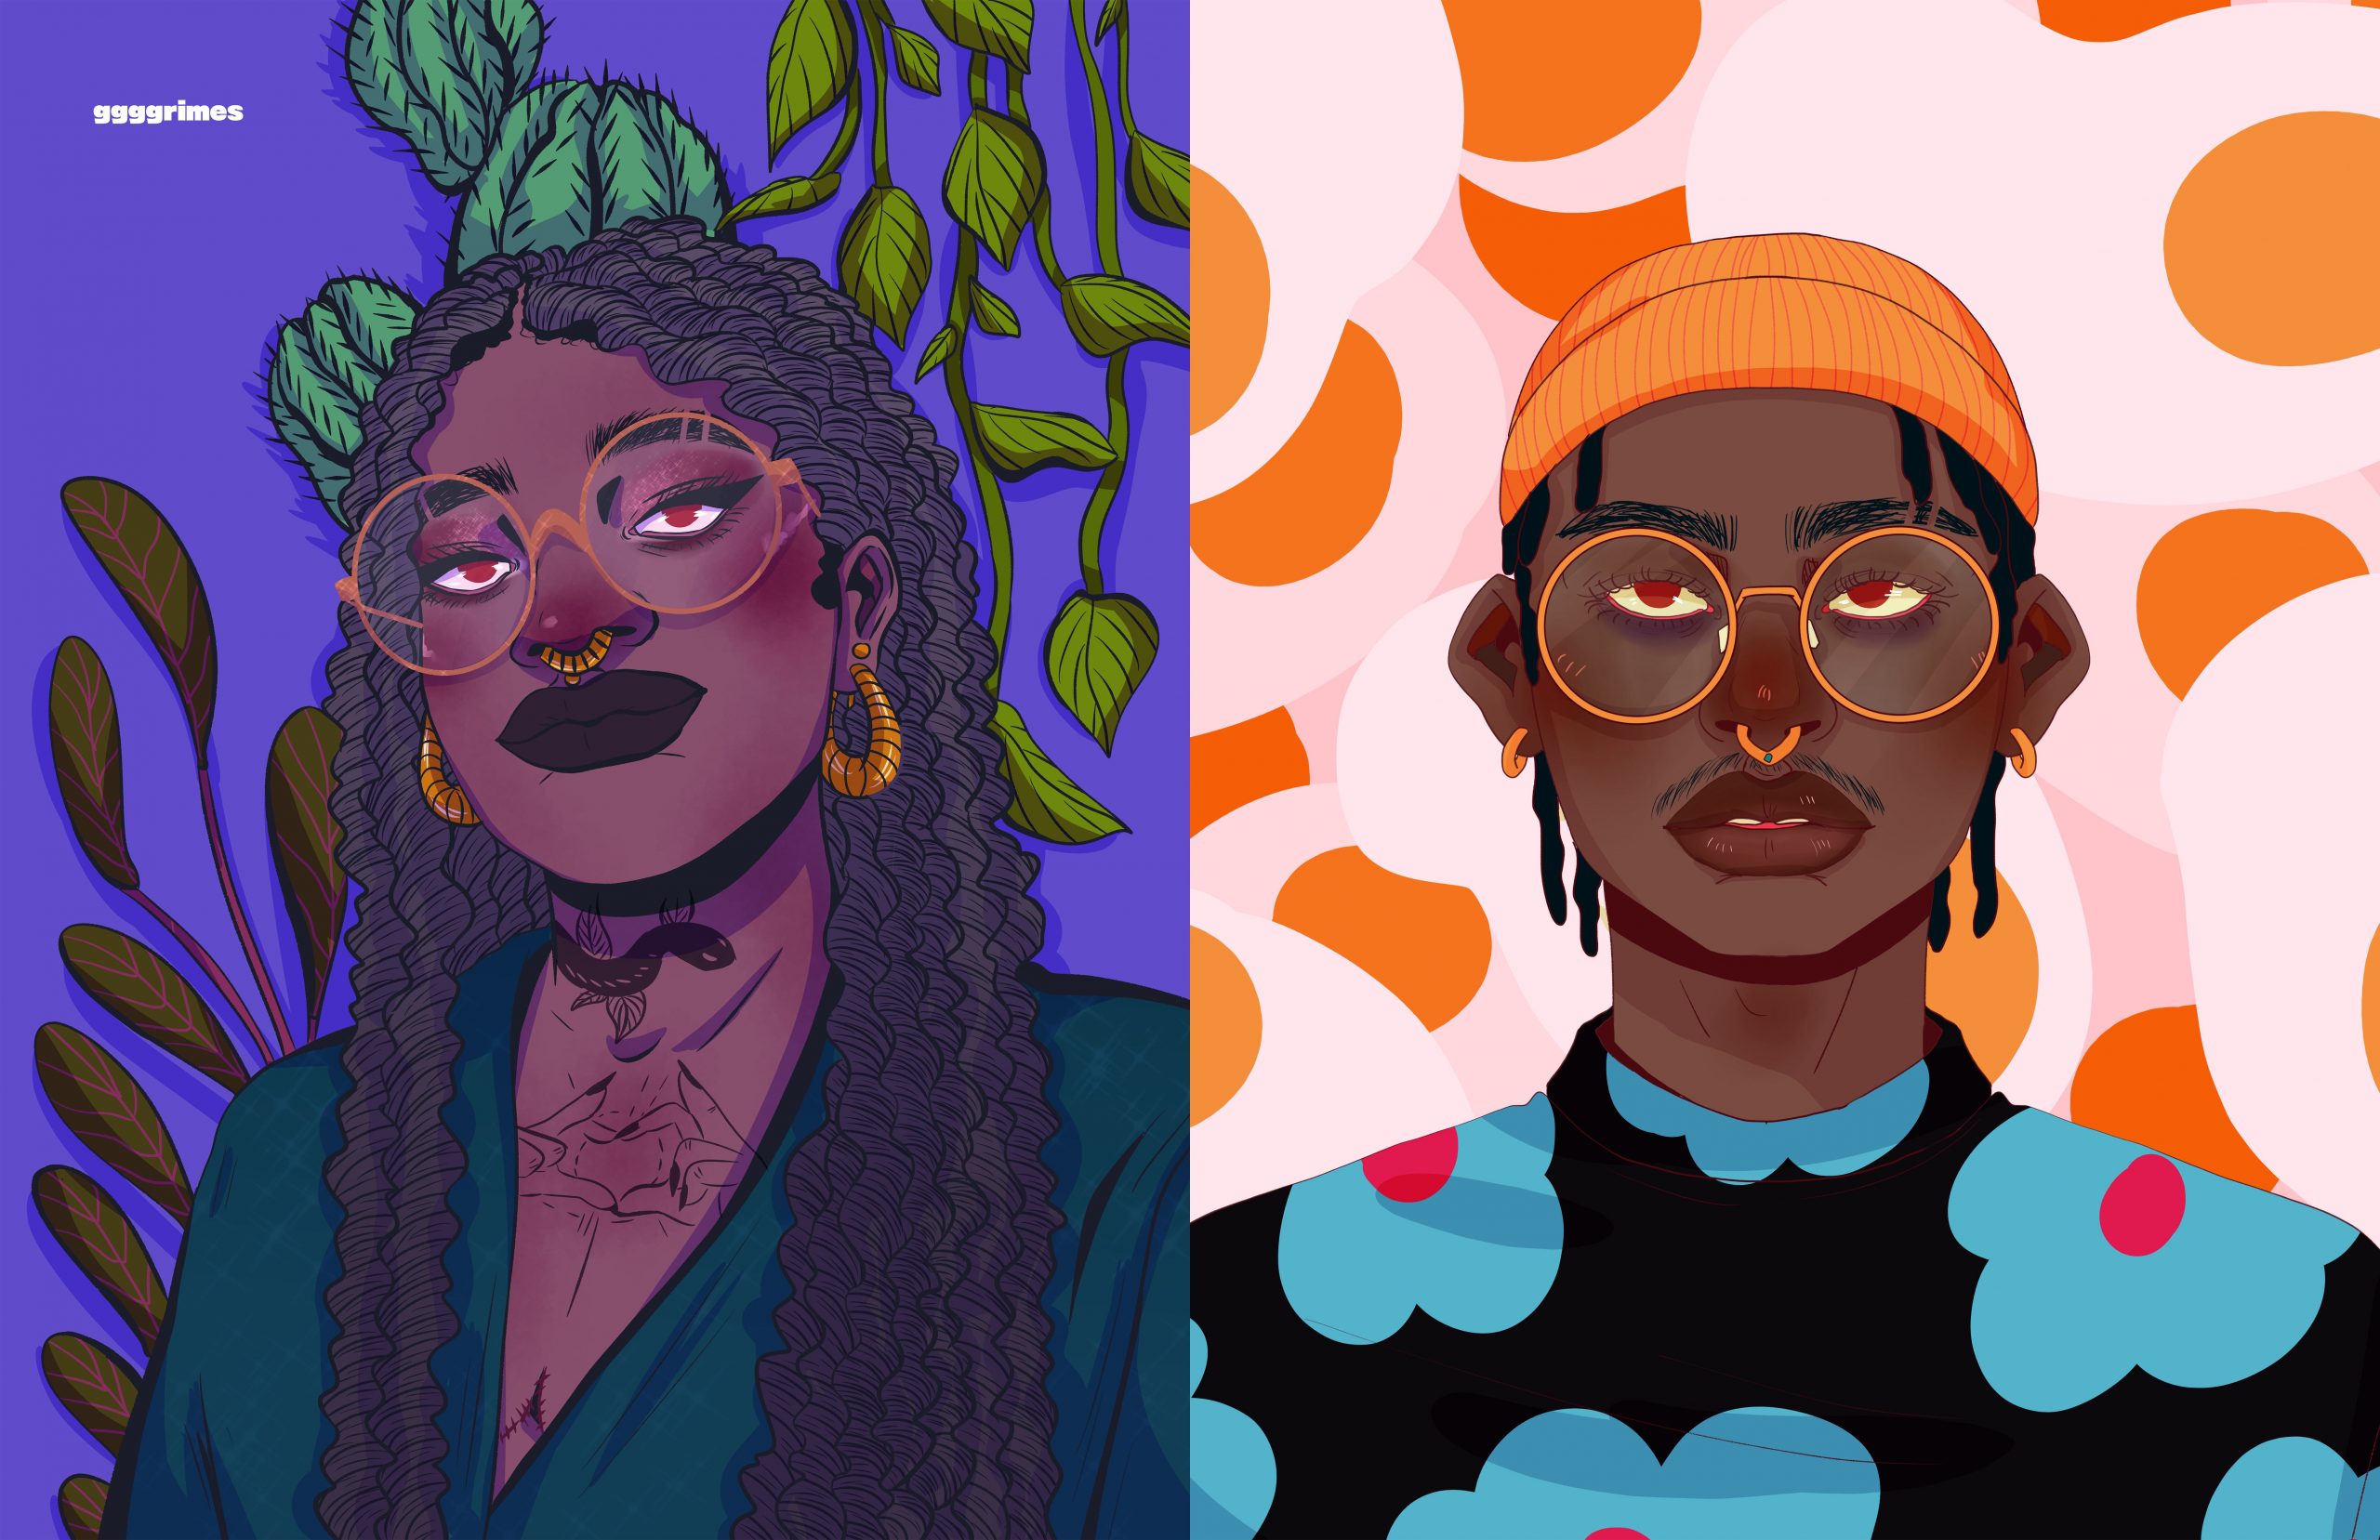 two illustrations of ggggrimes, a Black nonbinary person with dark hair and matching gold glasses, septum ring, and earrings. On the left they present as Gabriela with long hair with tight waves, a black v-neck sweater, and a smile in front of a dark violet background with leaves. On the right they present as Theo with locs, a mustache, an orange durag, a dark shirt with blue flowers, and a neutral expression in front of an orange patterned background